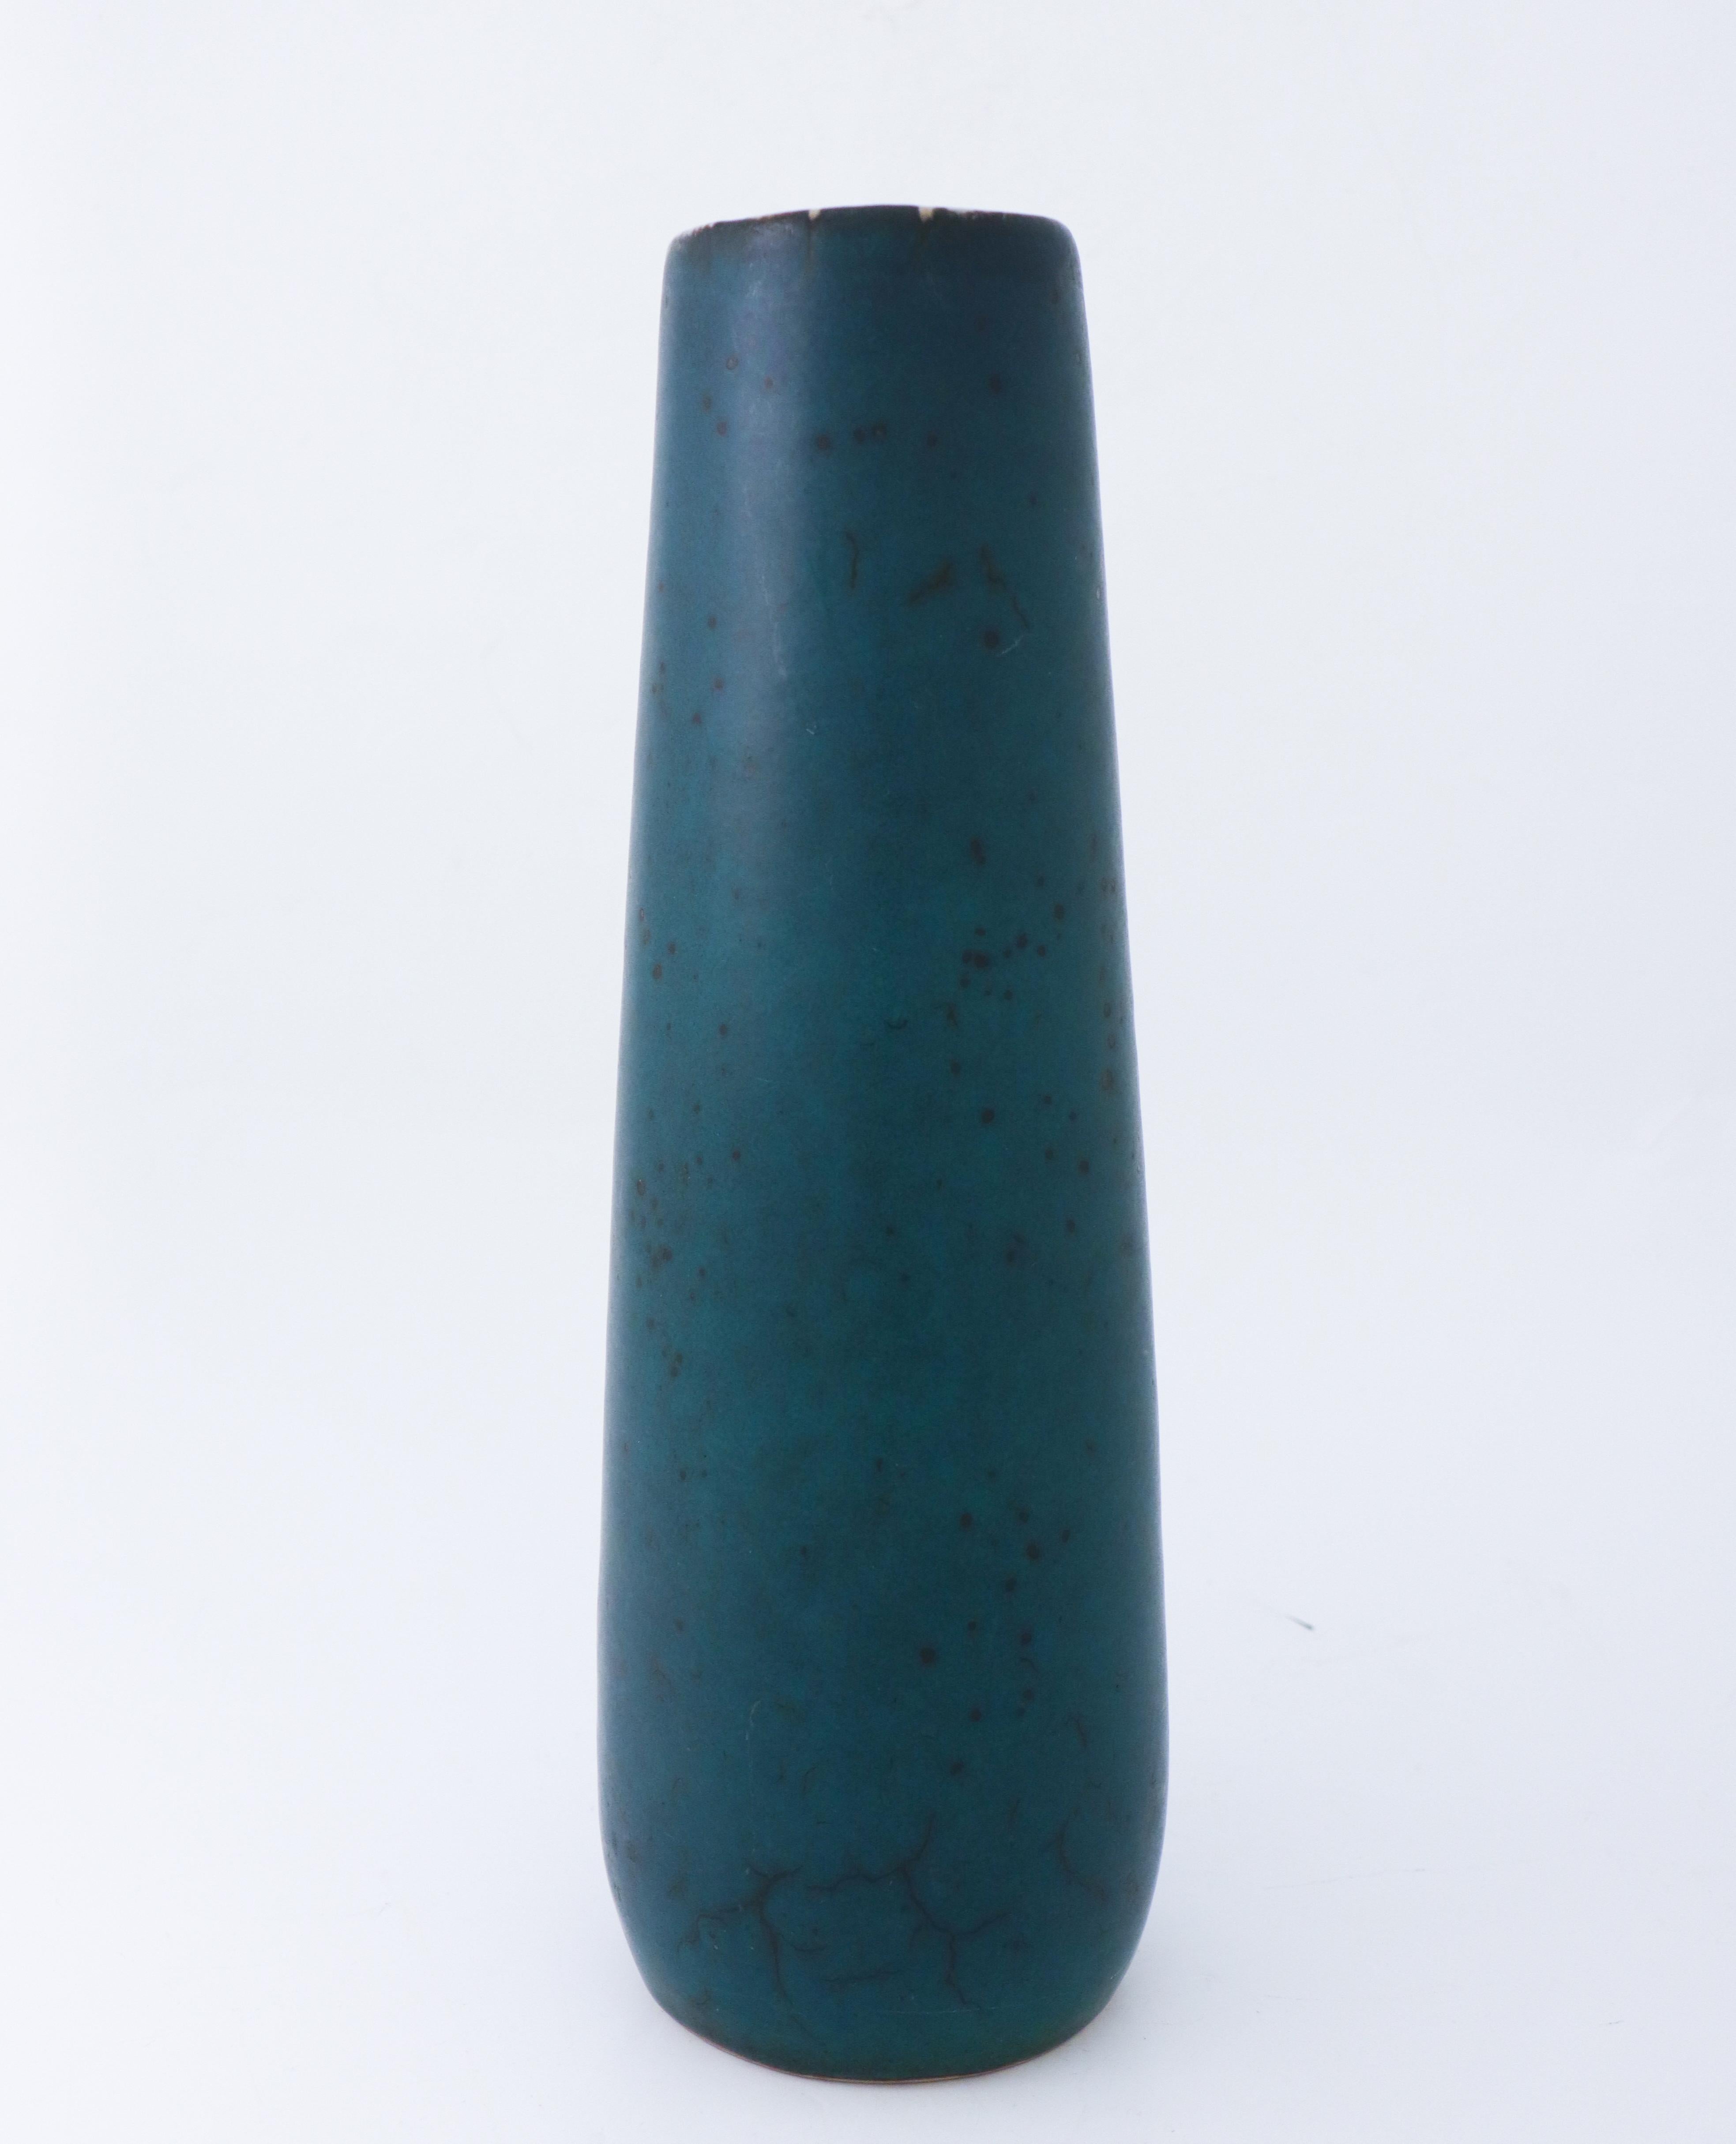 A large dark green vase designed by Carl-Harry Stålhane at Rörstrand Atelier, it´s 36,5 cm high and it´s in mint condition.
 